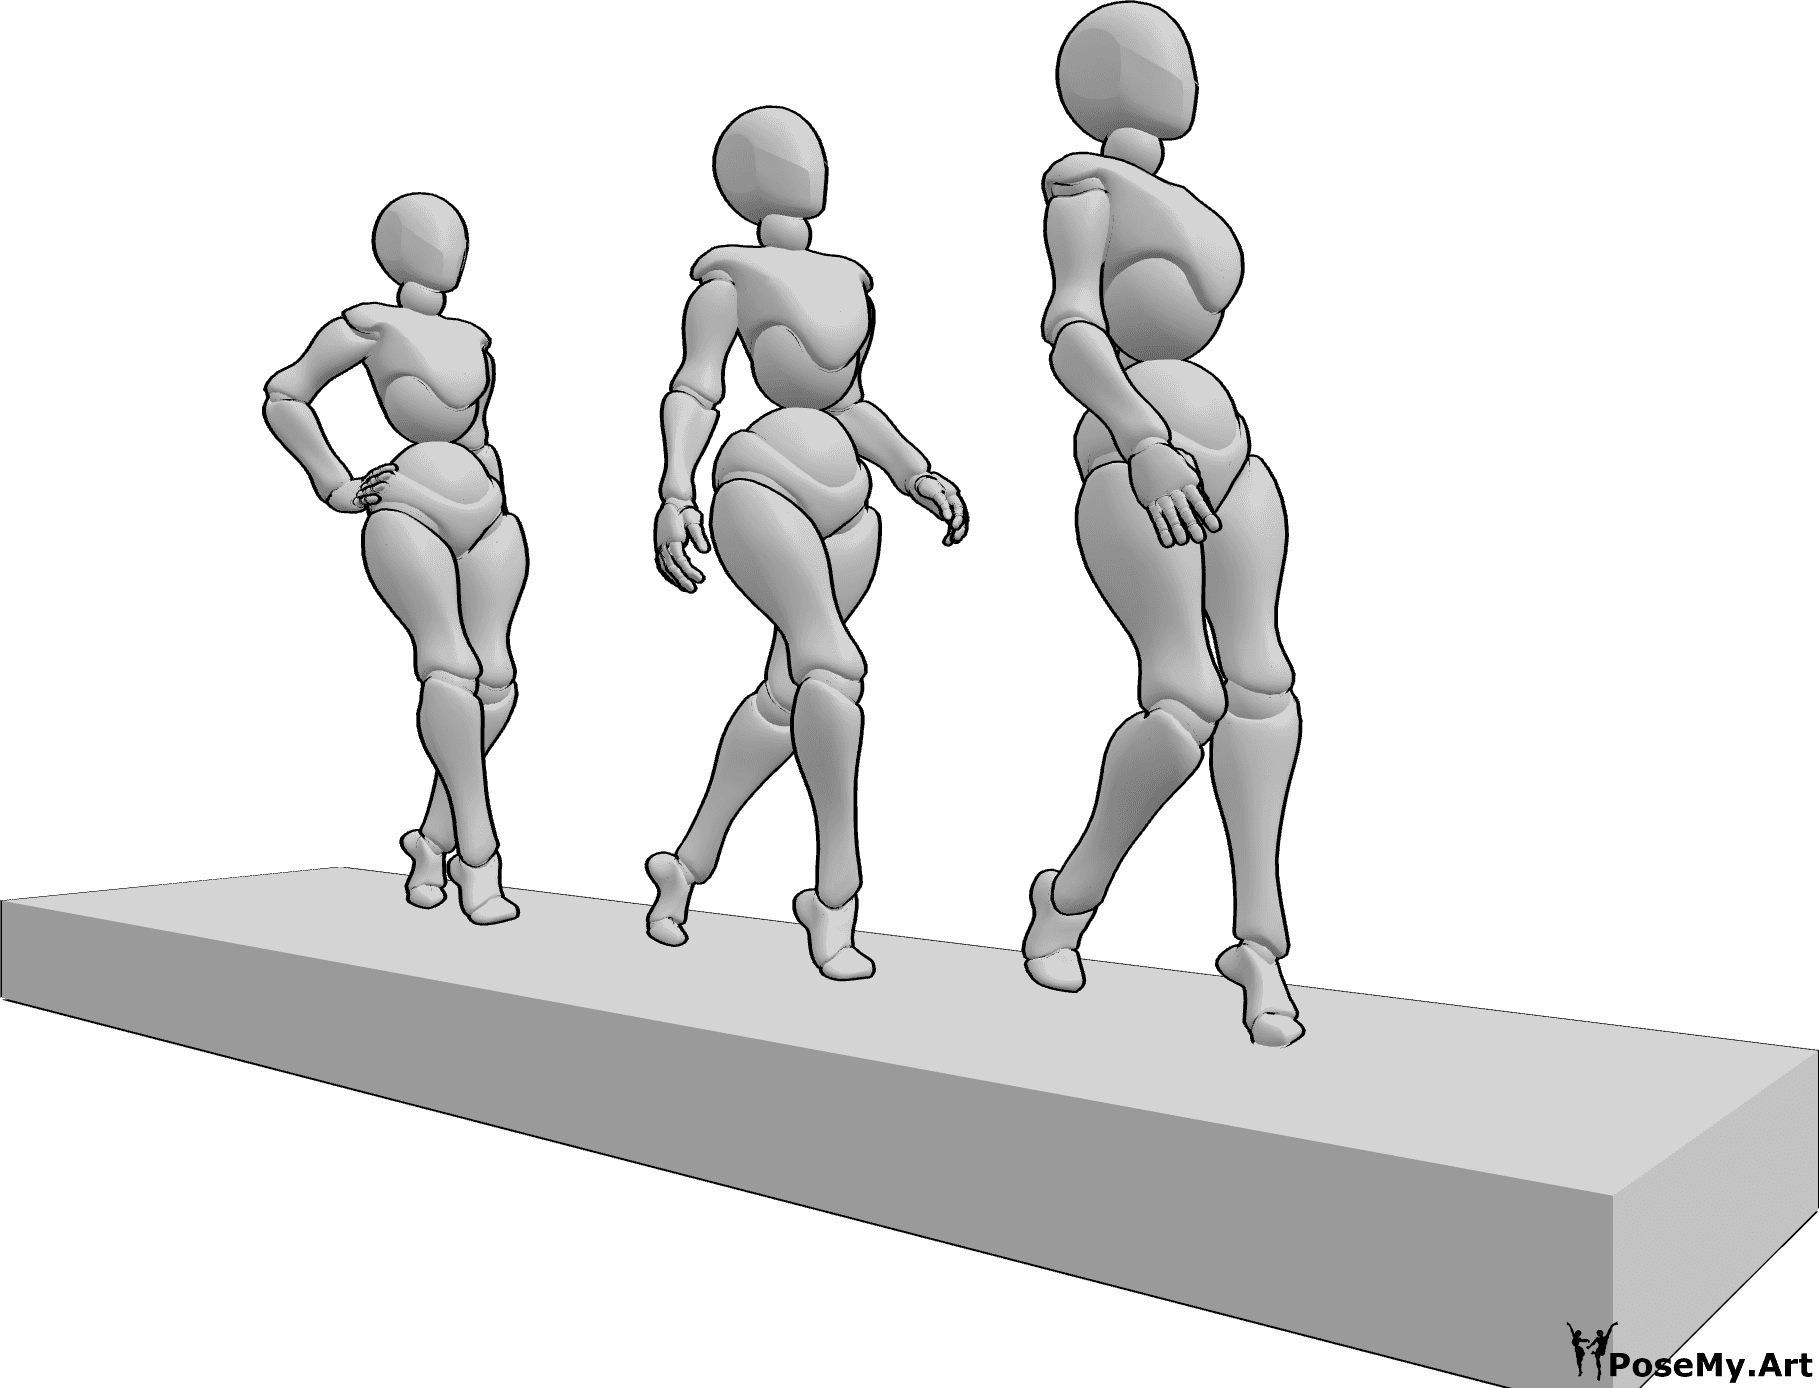 Pose Reference- Catwalk high heels pose - Female model is walking on the catwalk in high heels